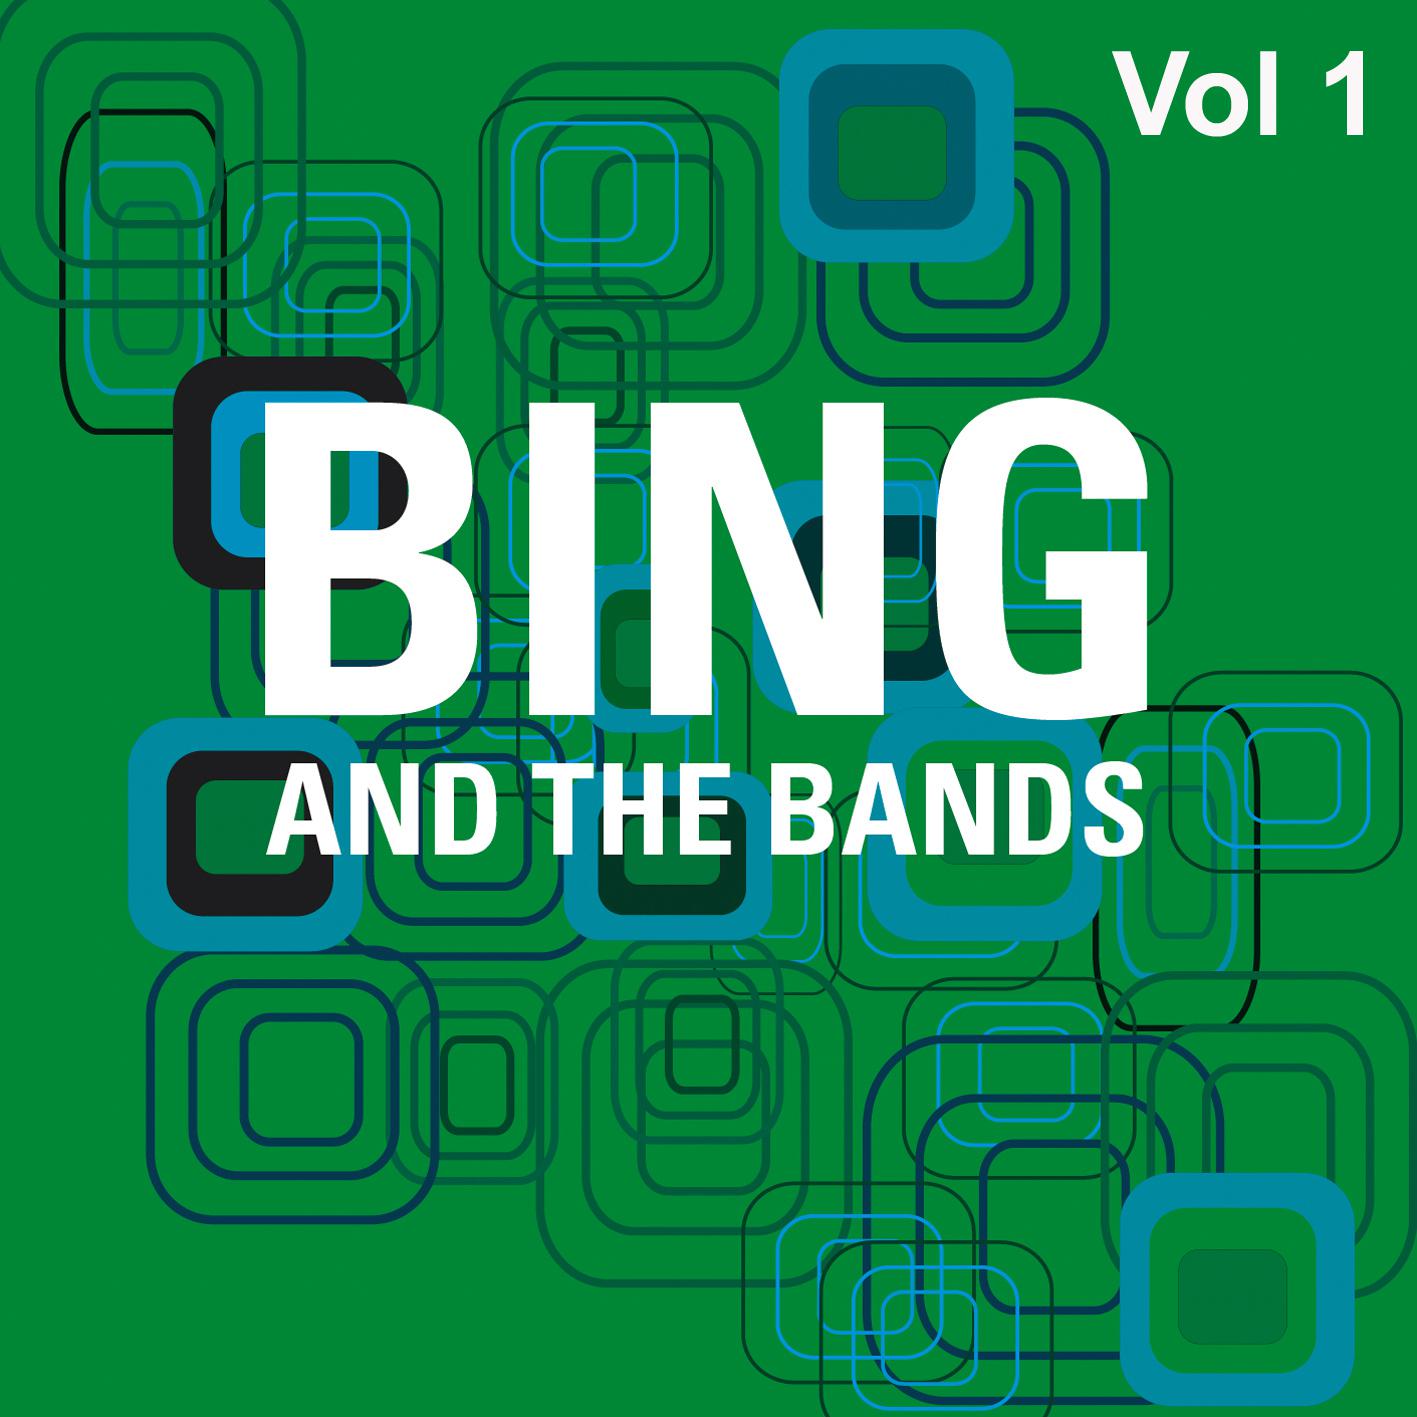 Bing and the Bands Vol 1